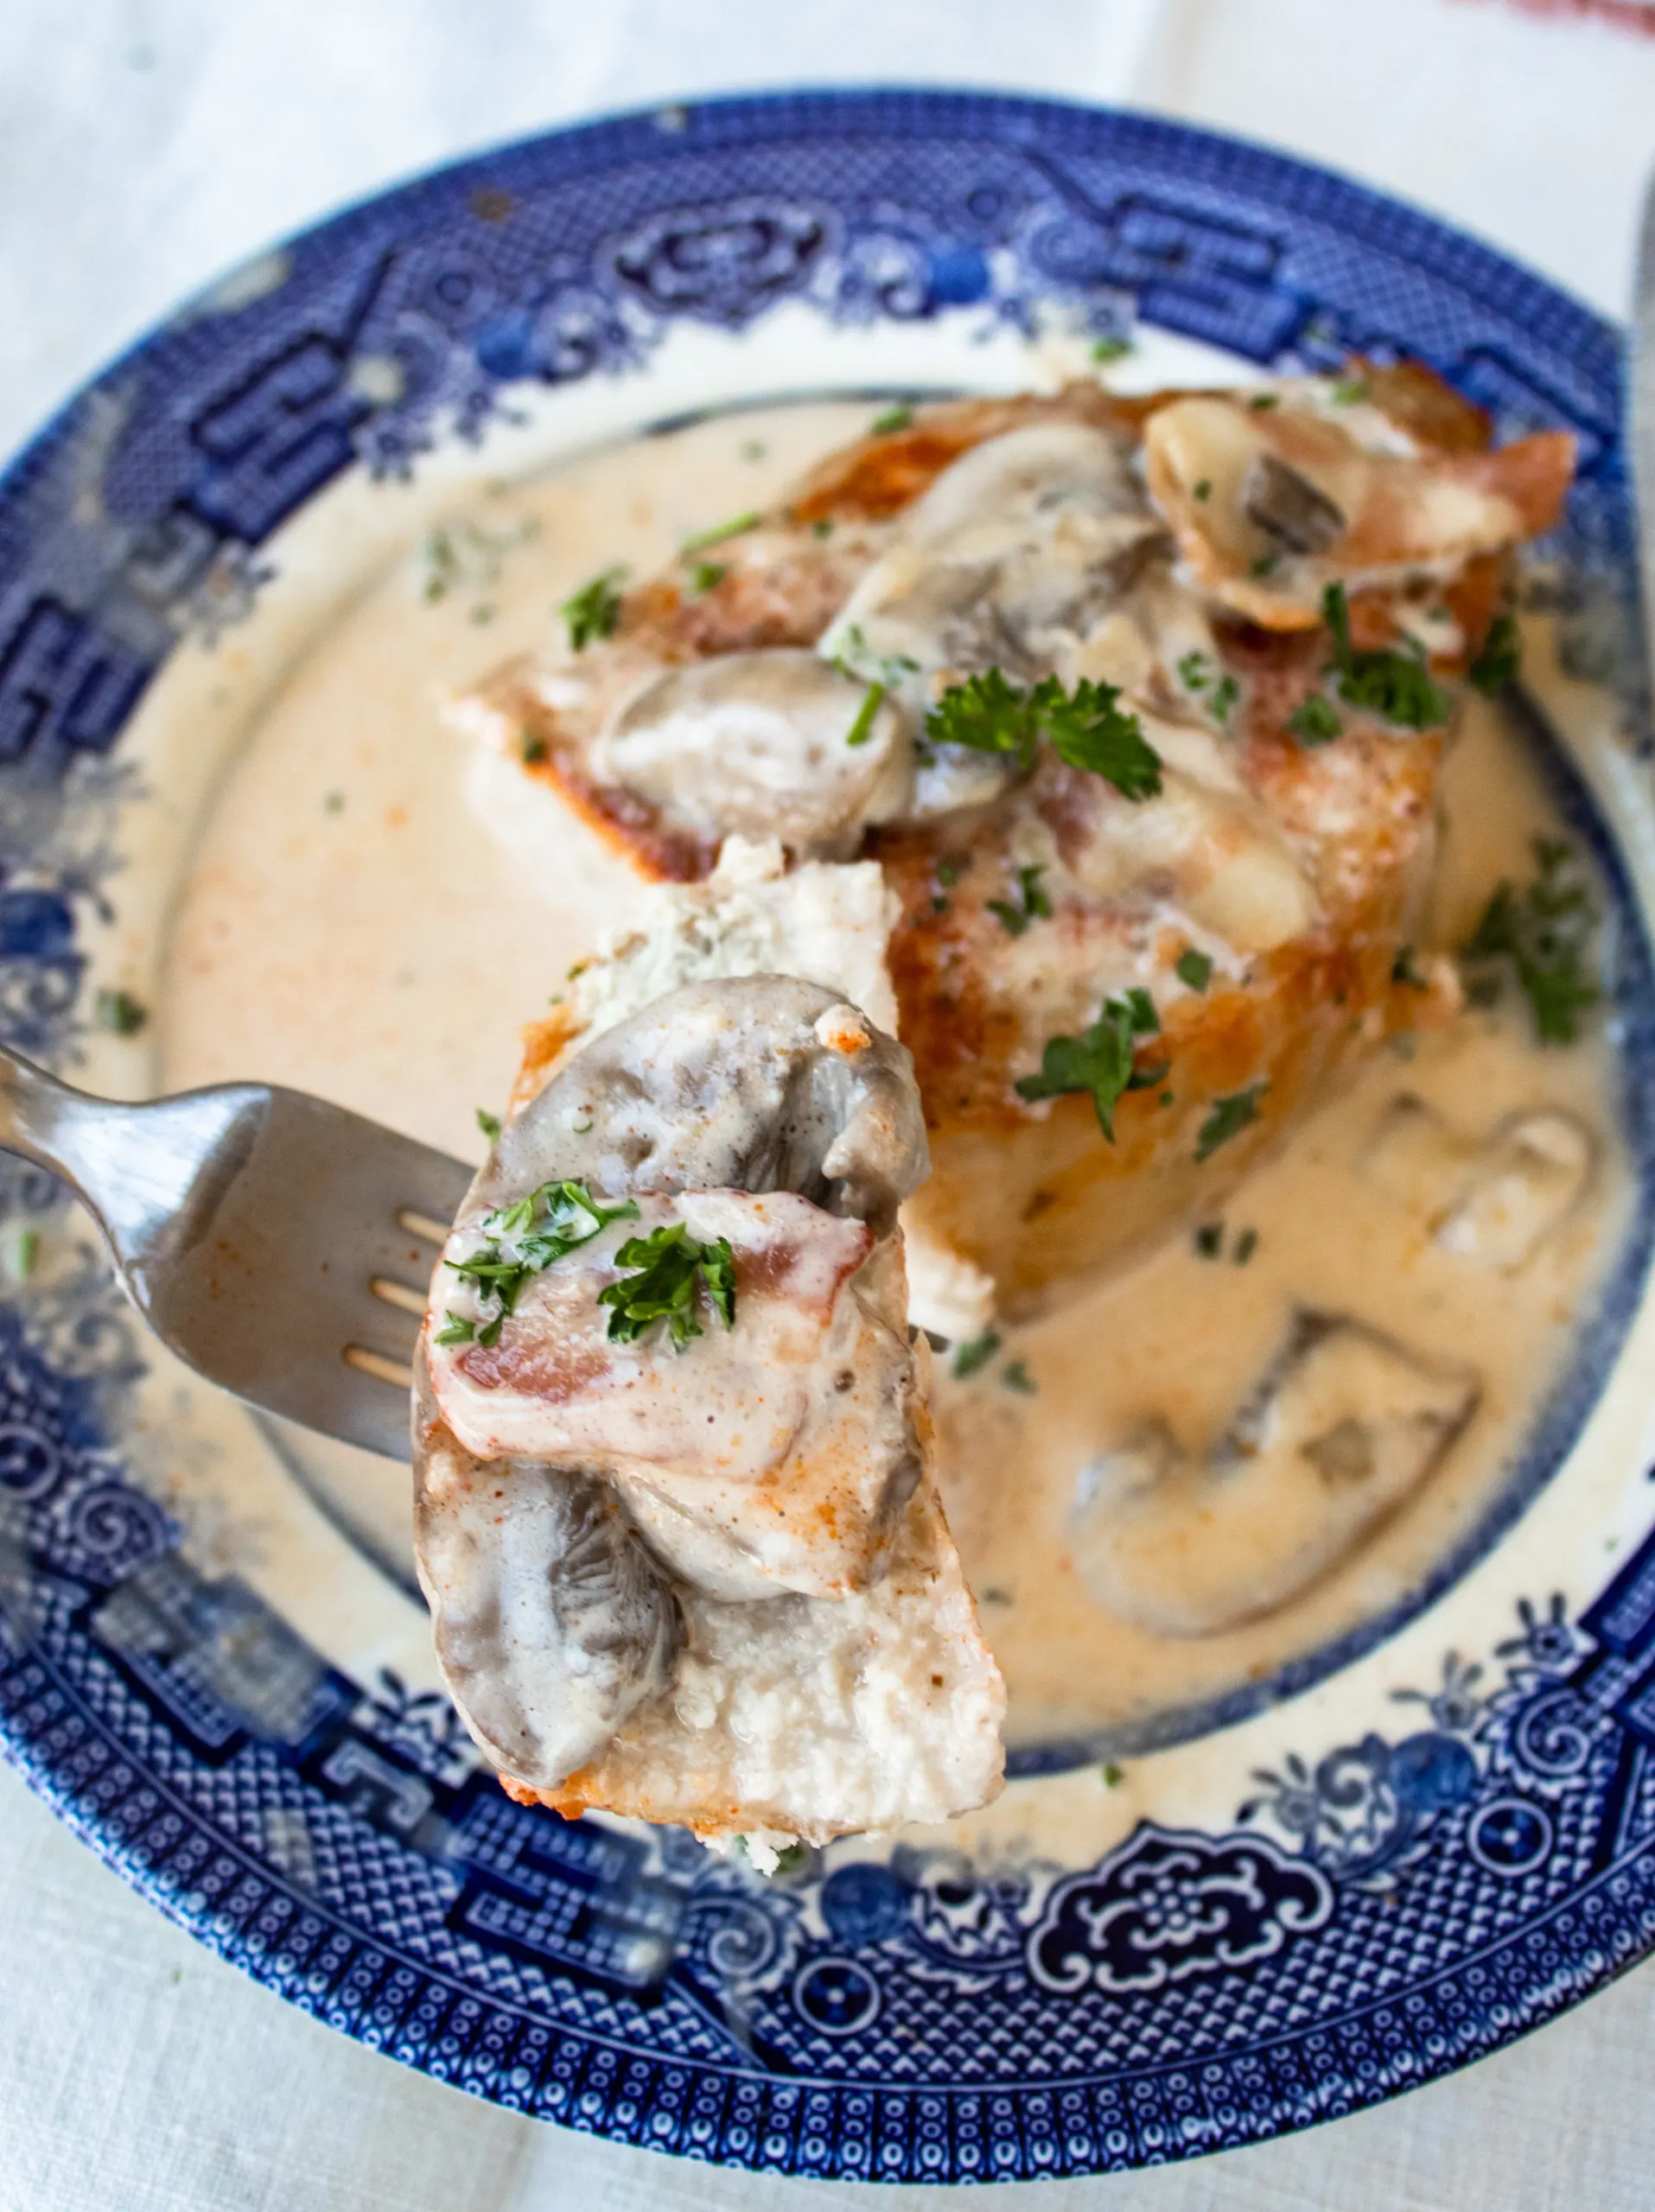 Thick cut boneless pork chops are seasoned and baked in the oven before getting smothered in a bacon and mushroom cream sauce.